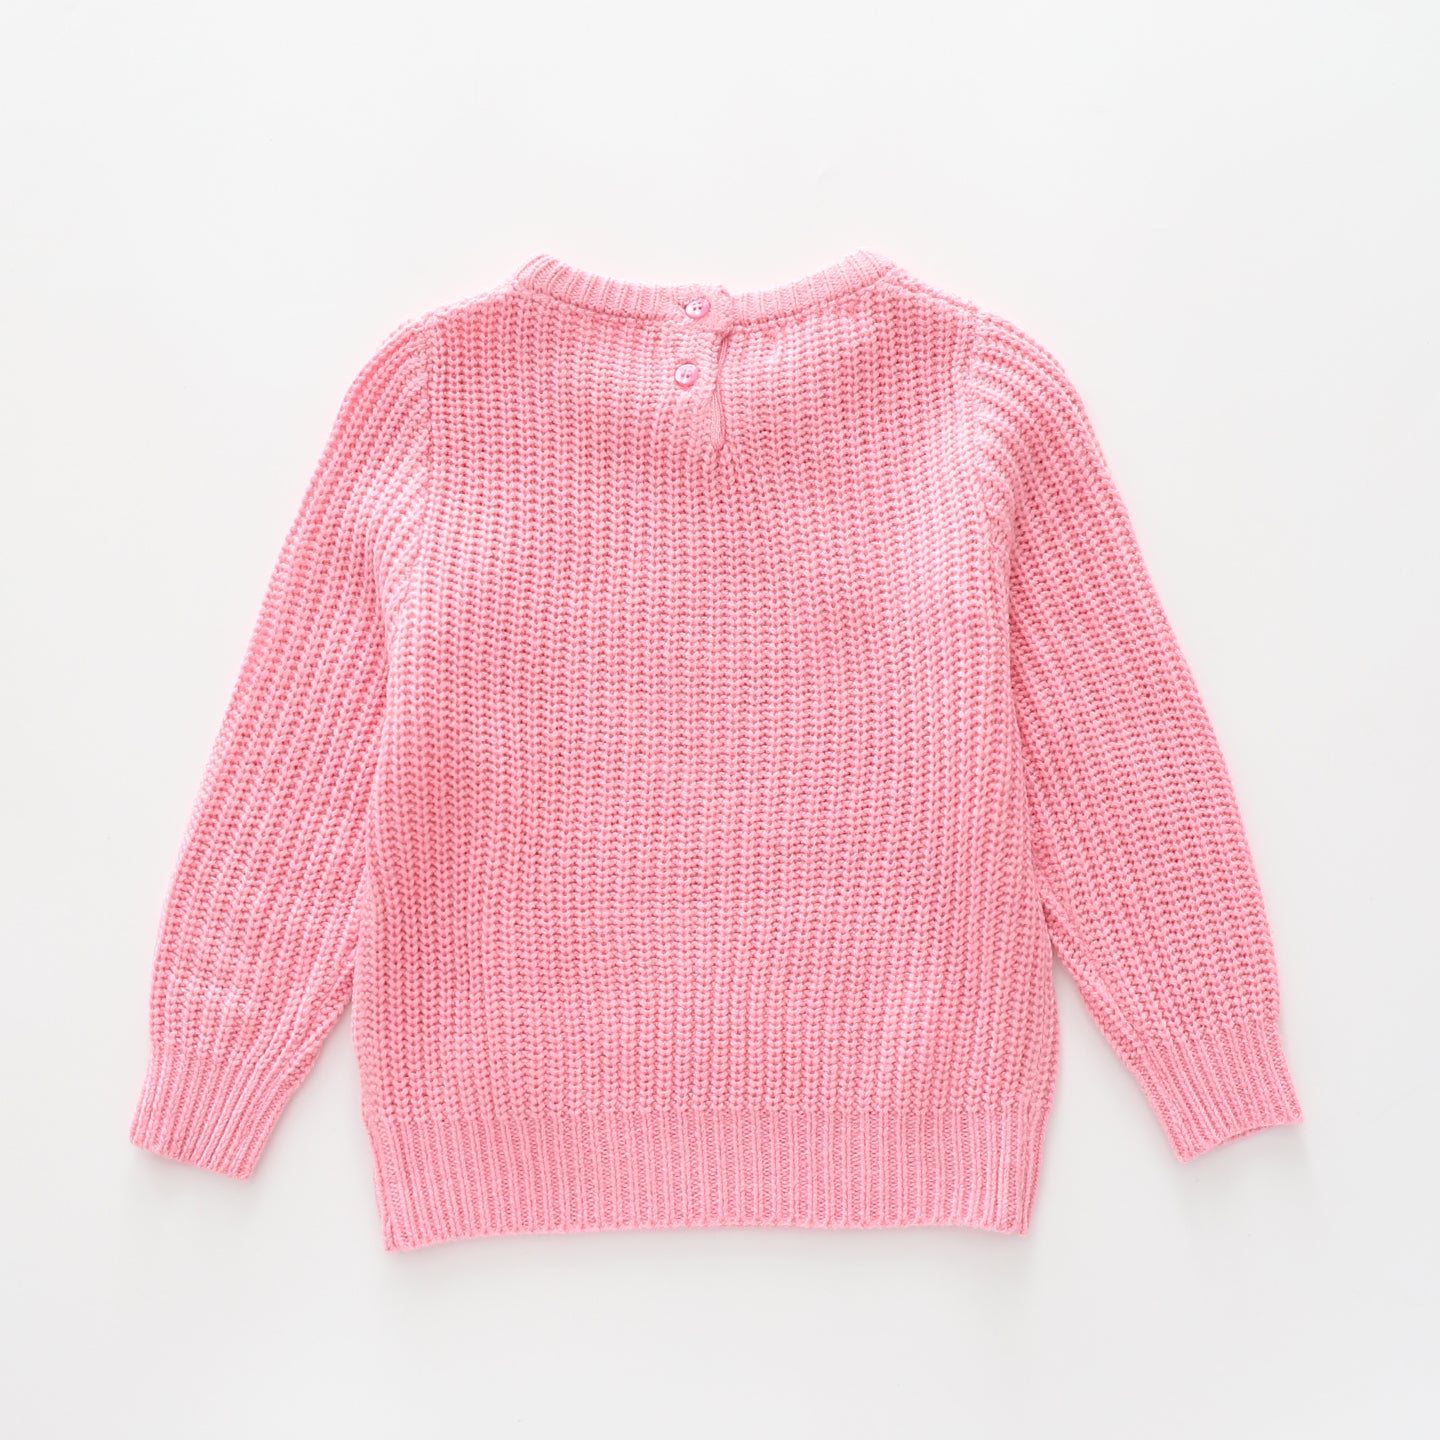 Over the Rainbow, Girls Knit Jumper